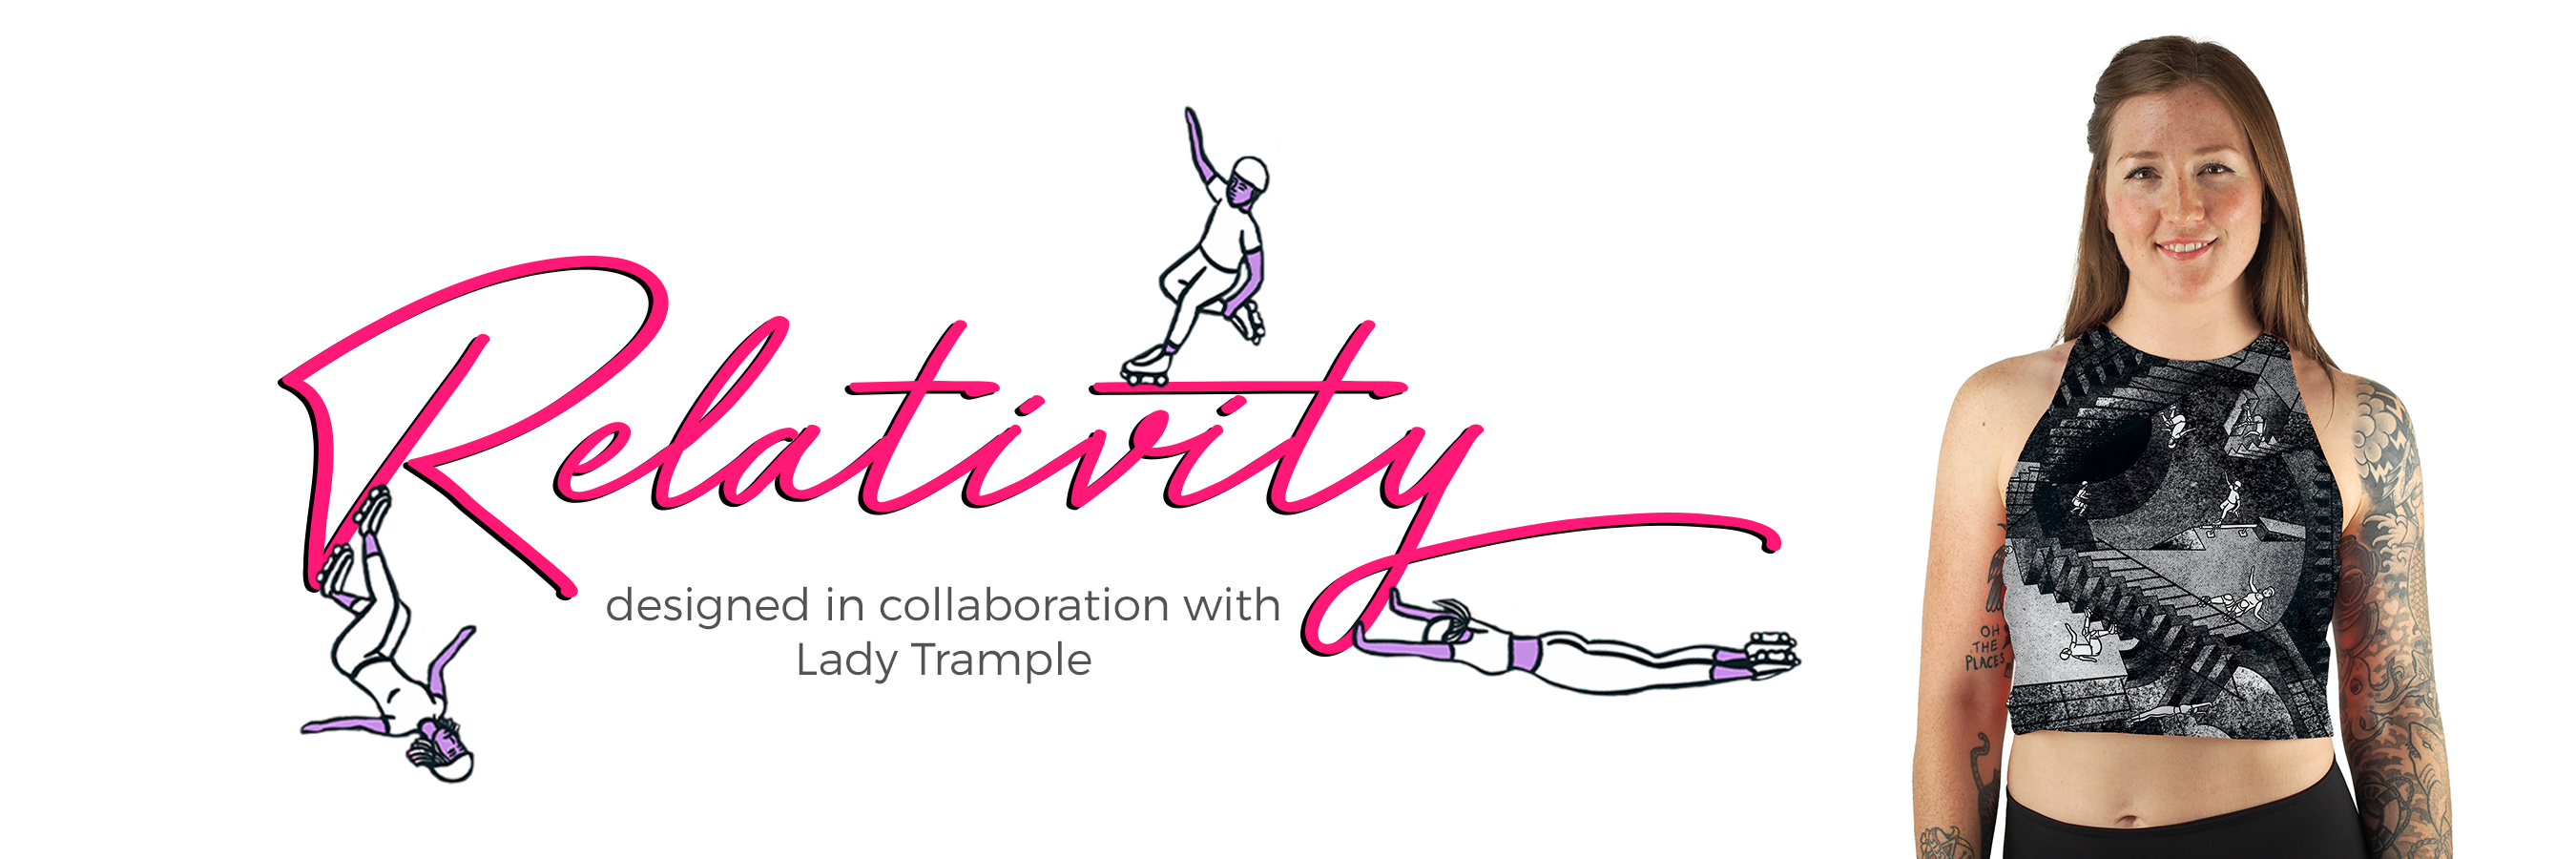 Relativity collection designed in collaboration with Lady Trample